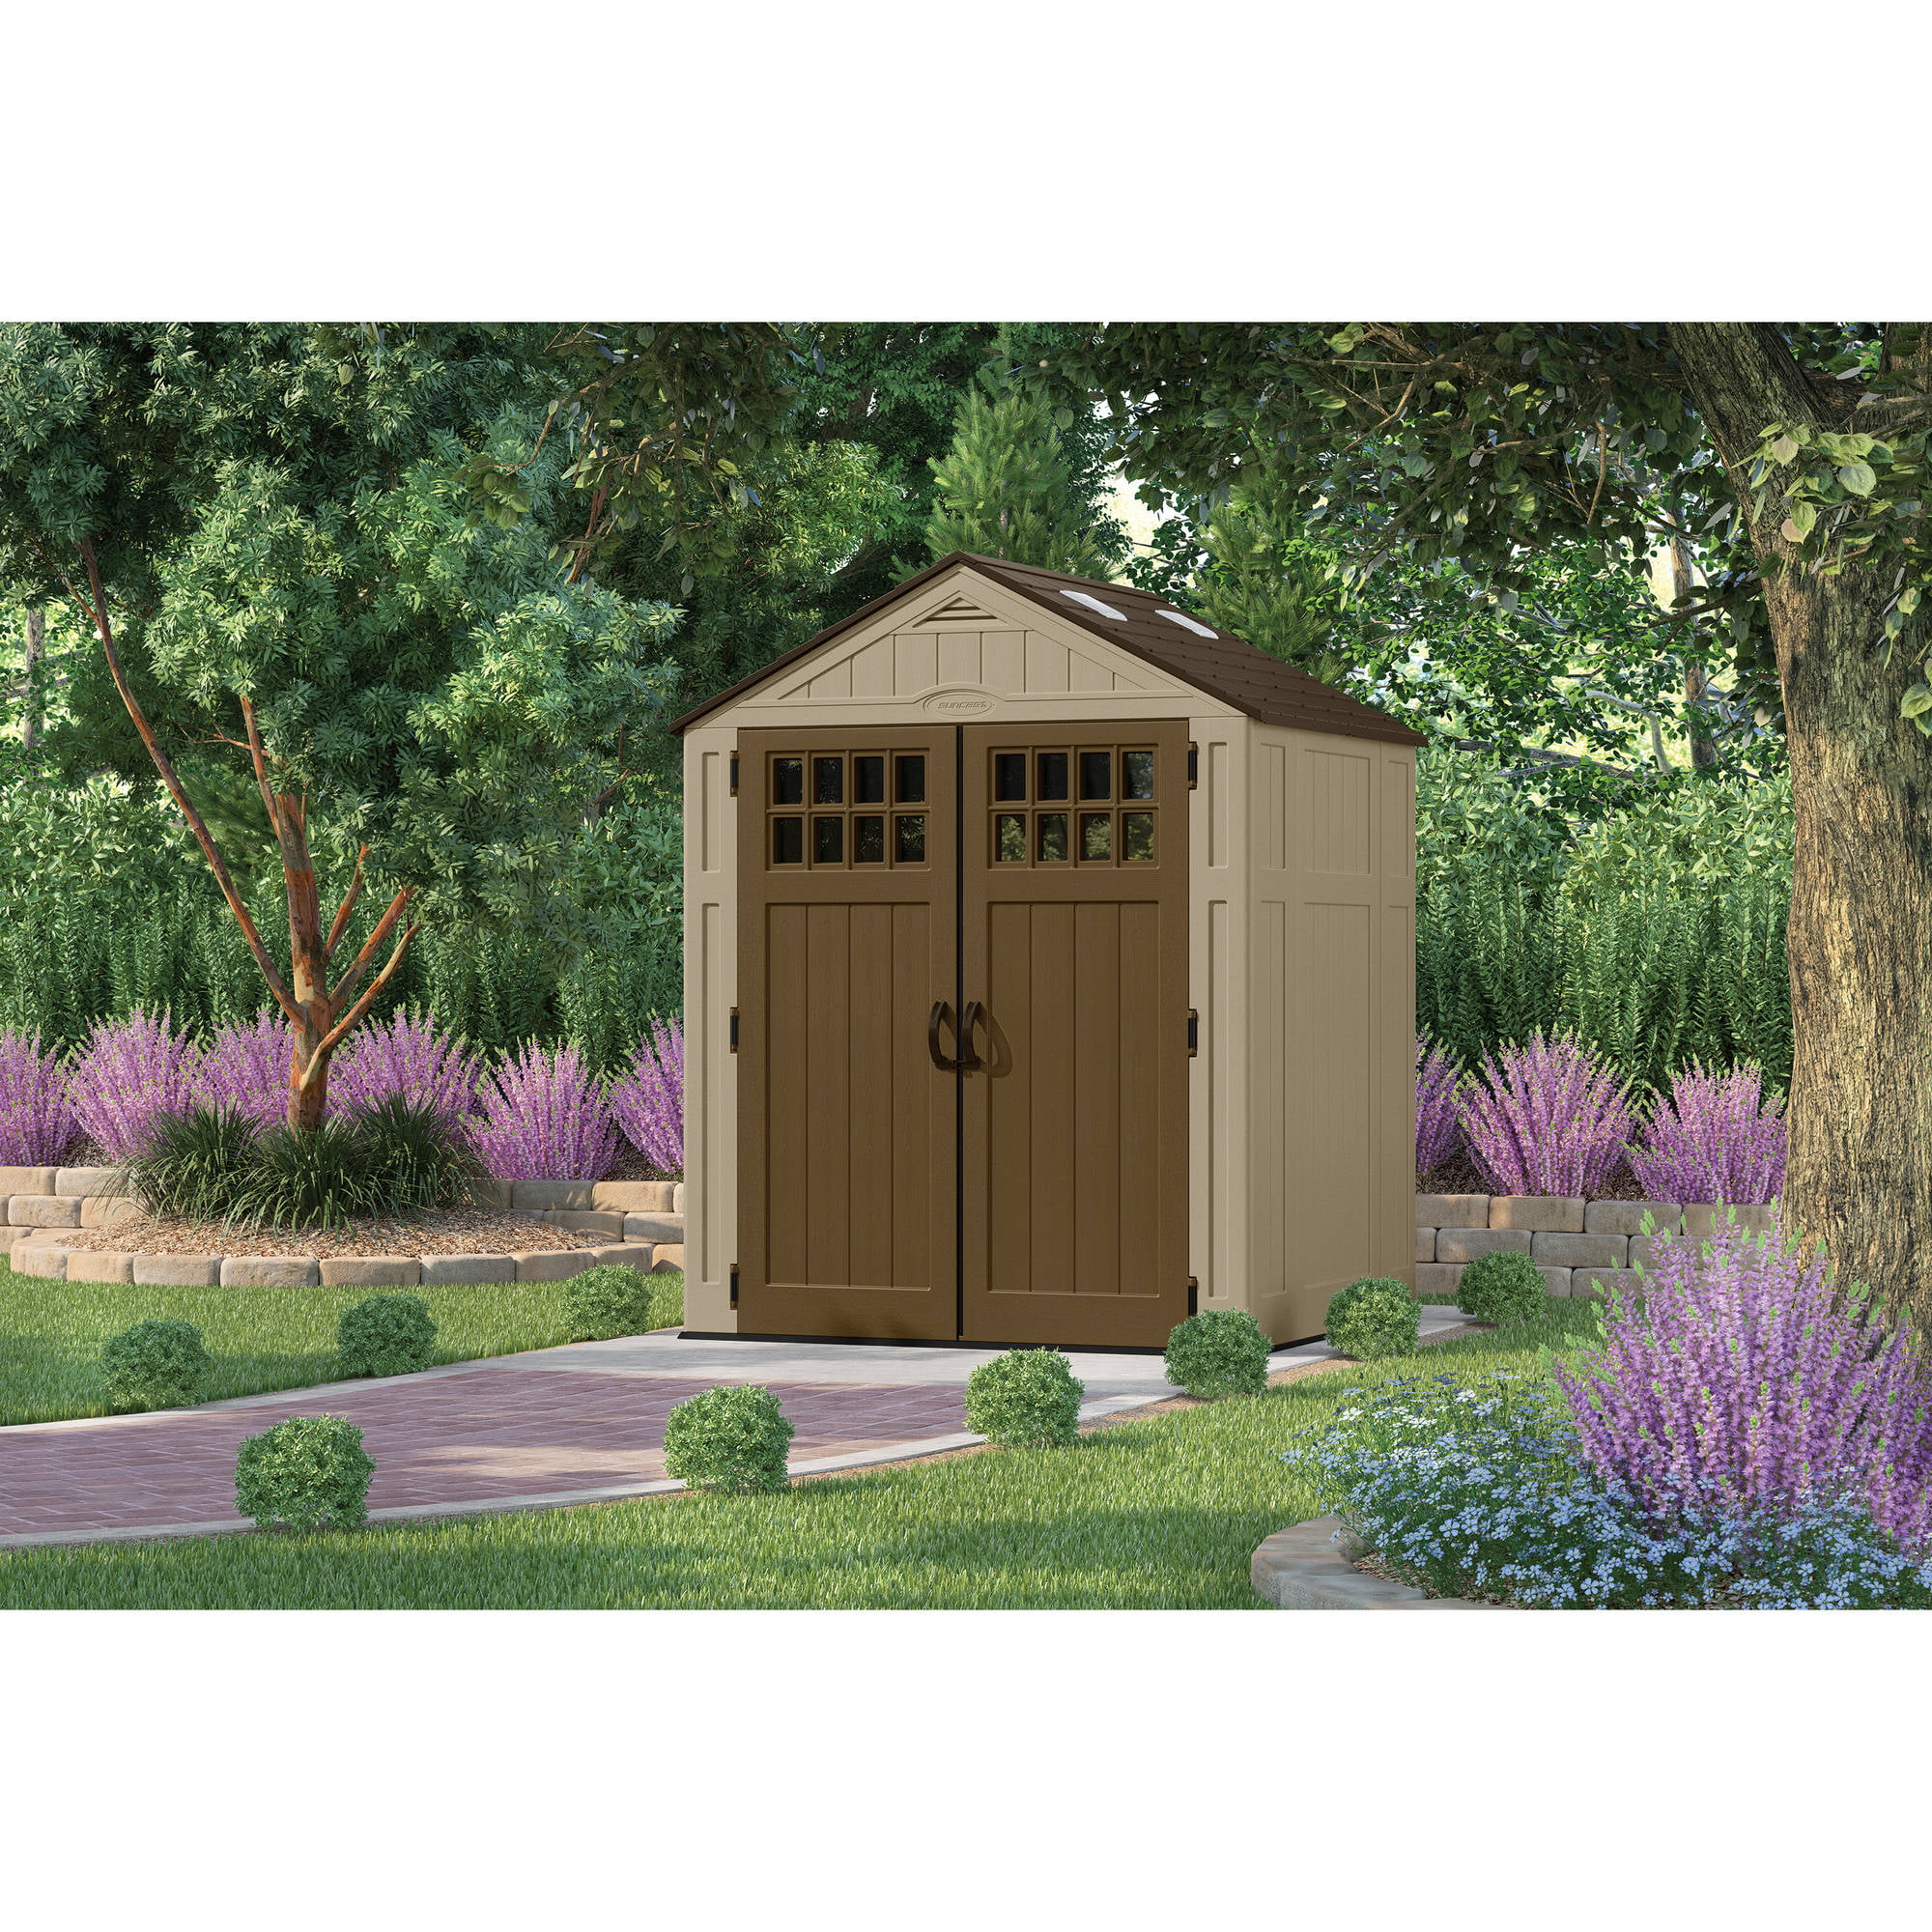 Keter 6 X 4 Shed X Apex Overlap Wooden Shed With Keter 6 X 4 Shed